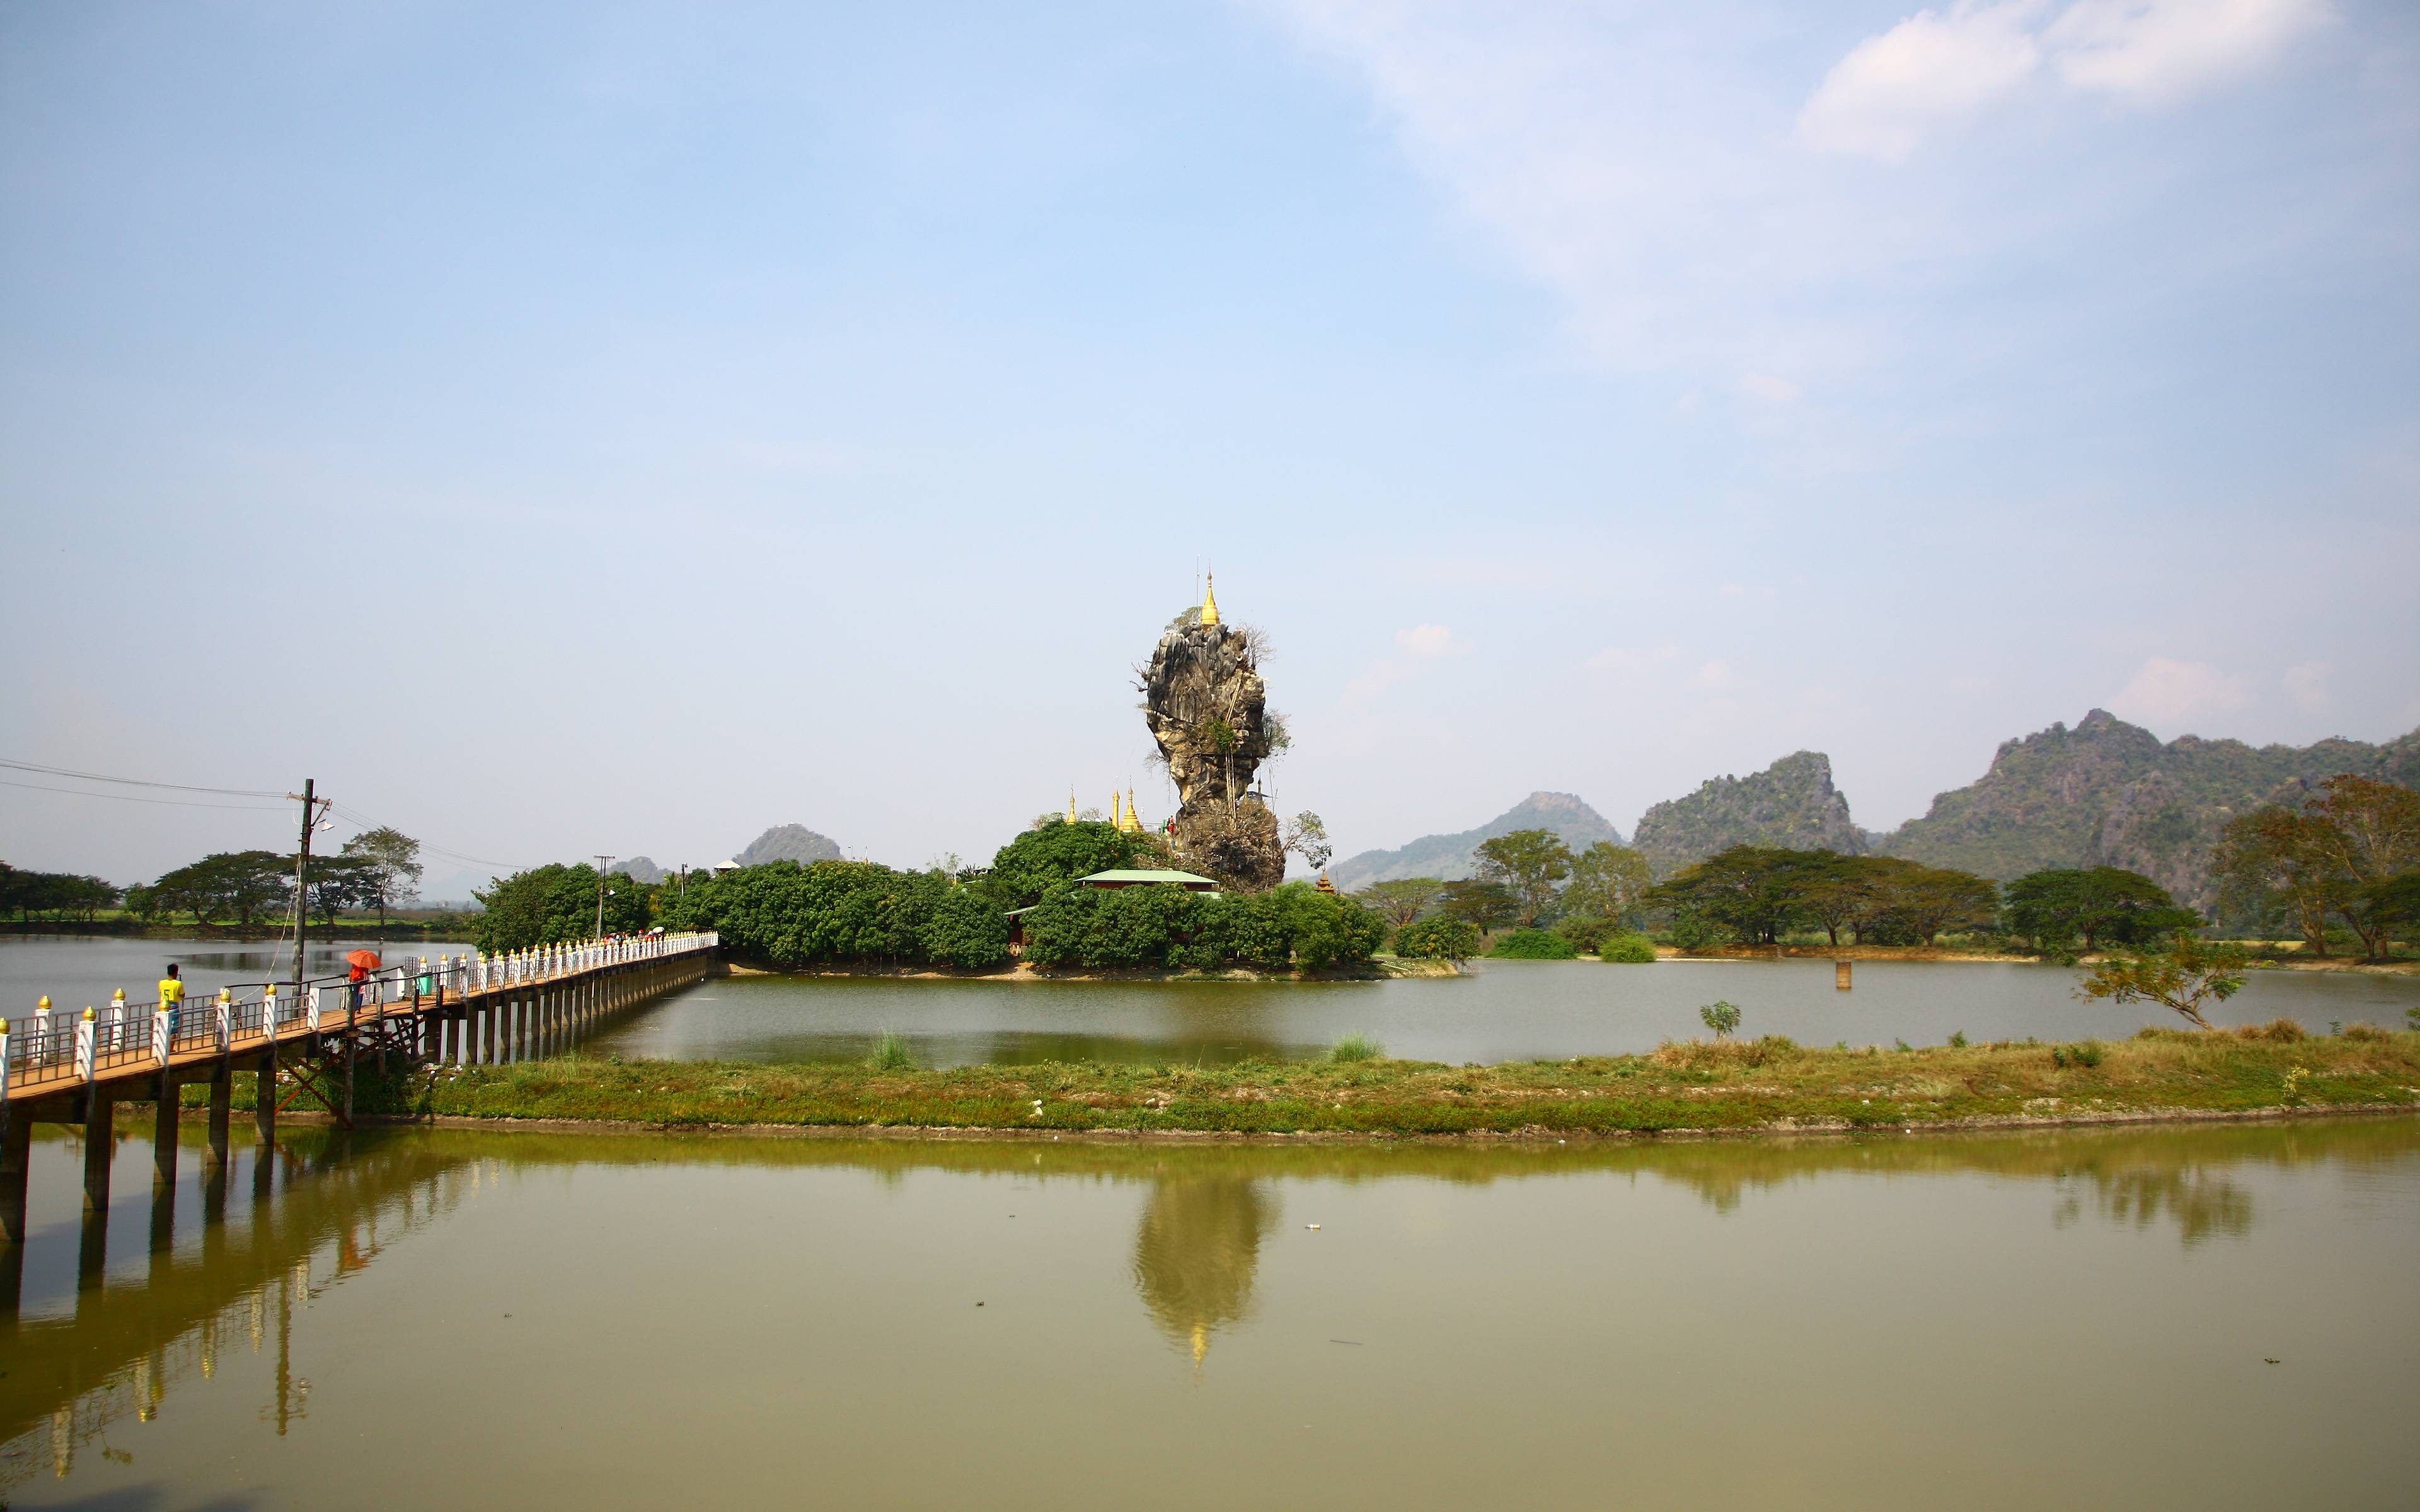 Hpa an